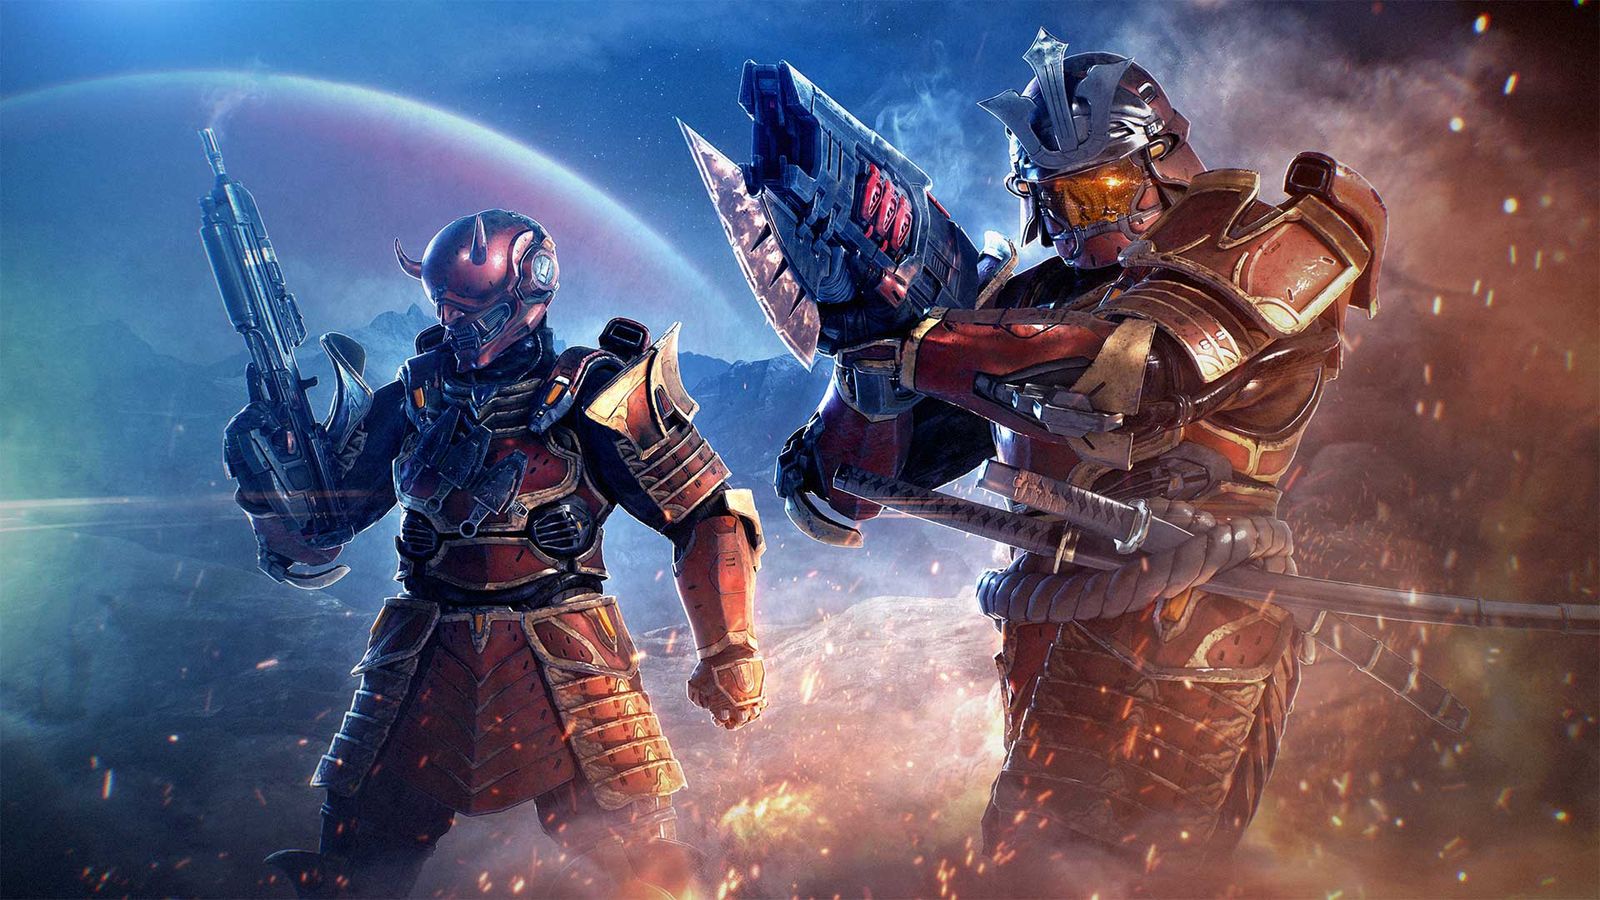 Fracture Tenrai concept art showing two Spartans in Samurai-style armour.